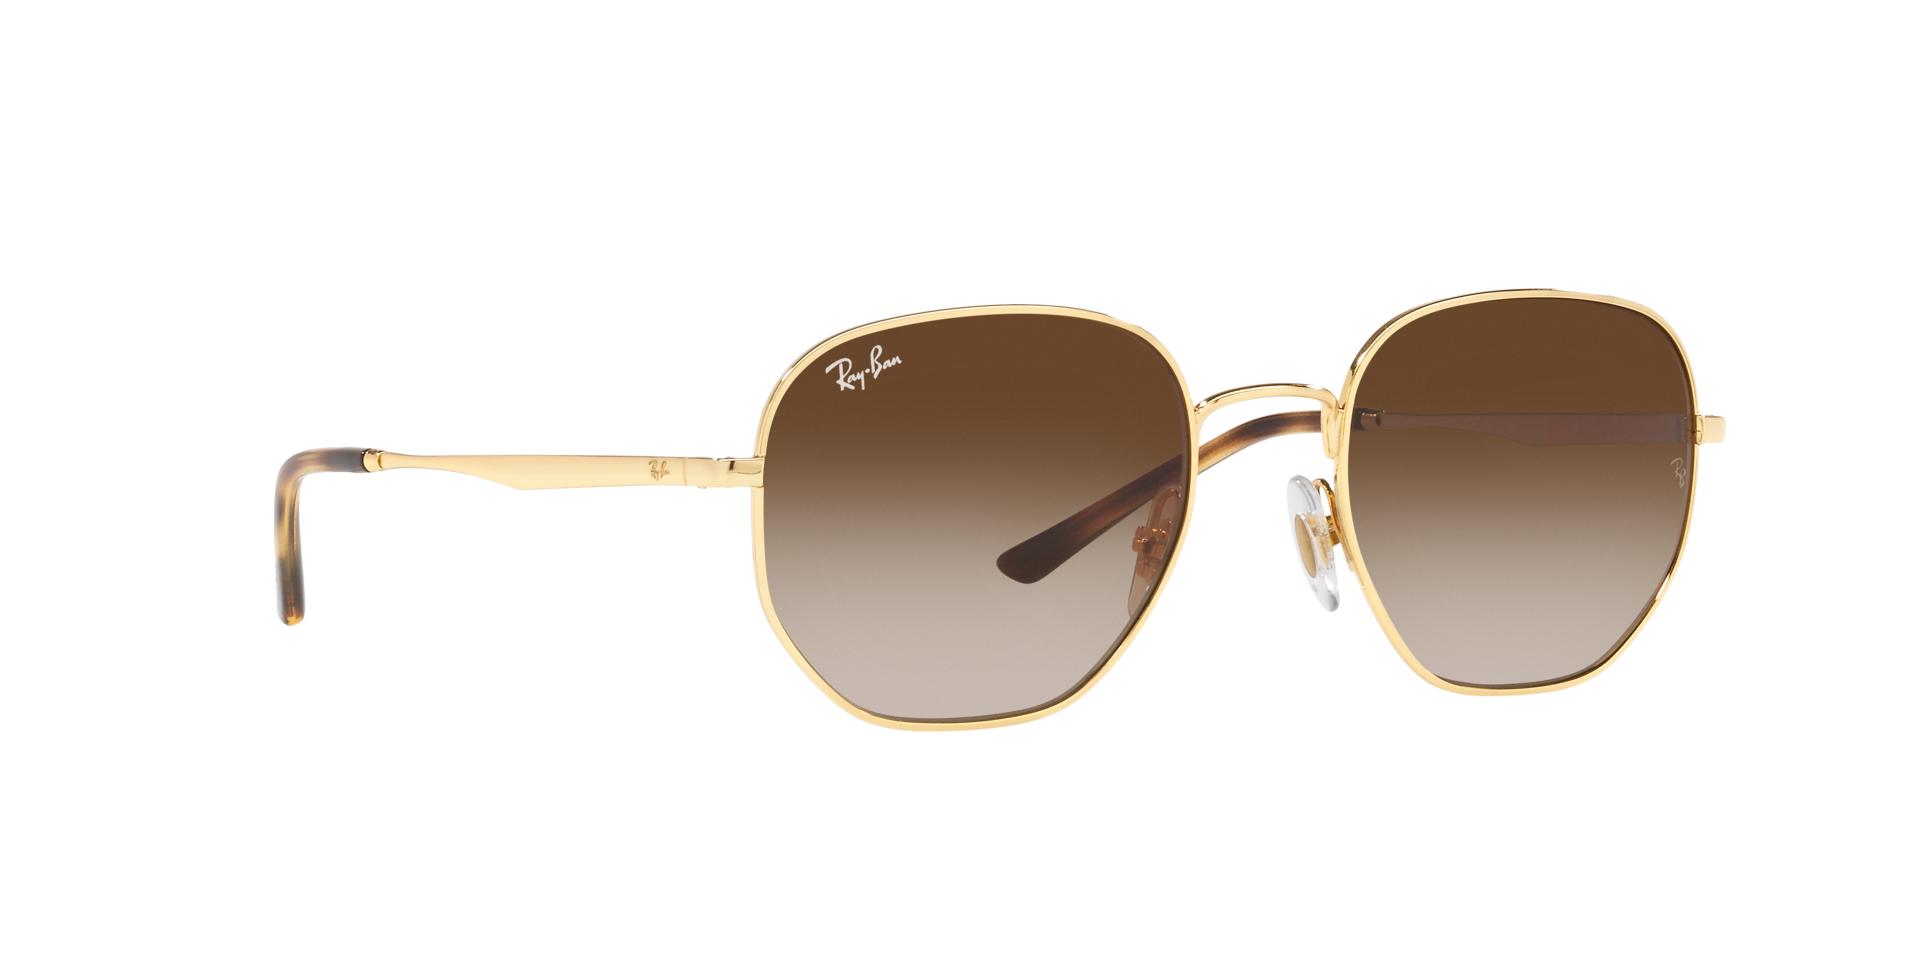 Buy Ray-Ban Rb3682 Sunglasses Online.